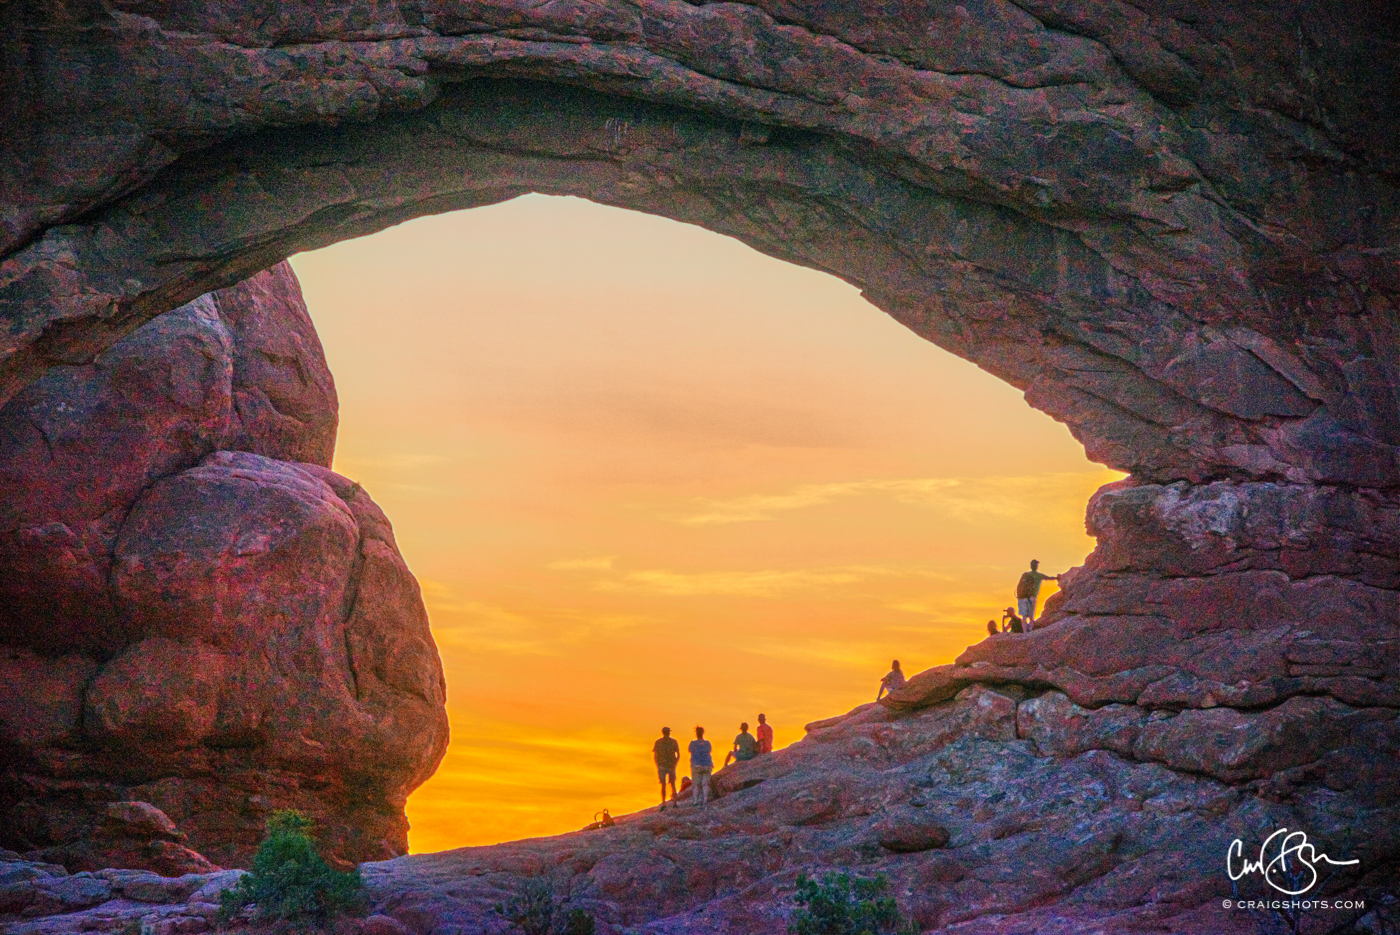 July 19: Awaiting Dawn at North Window, Arches National Park